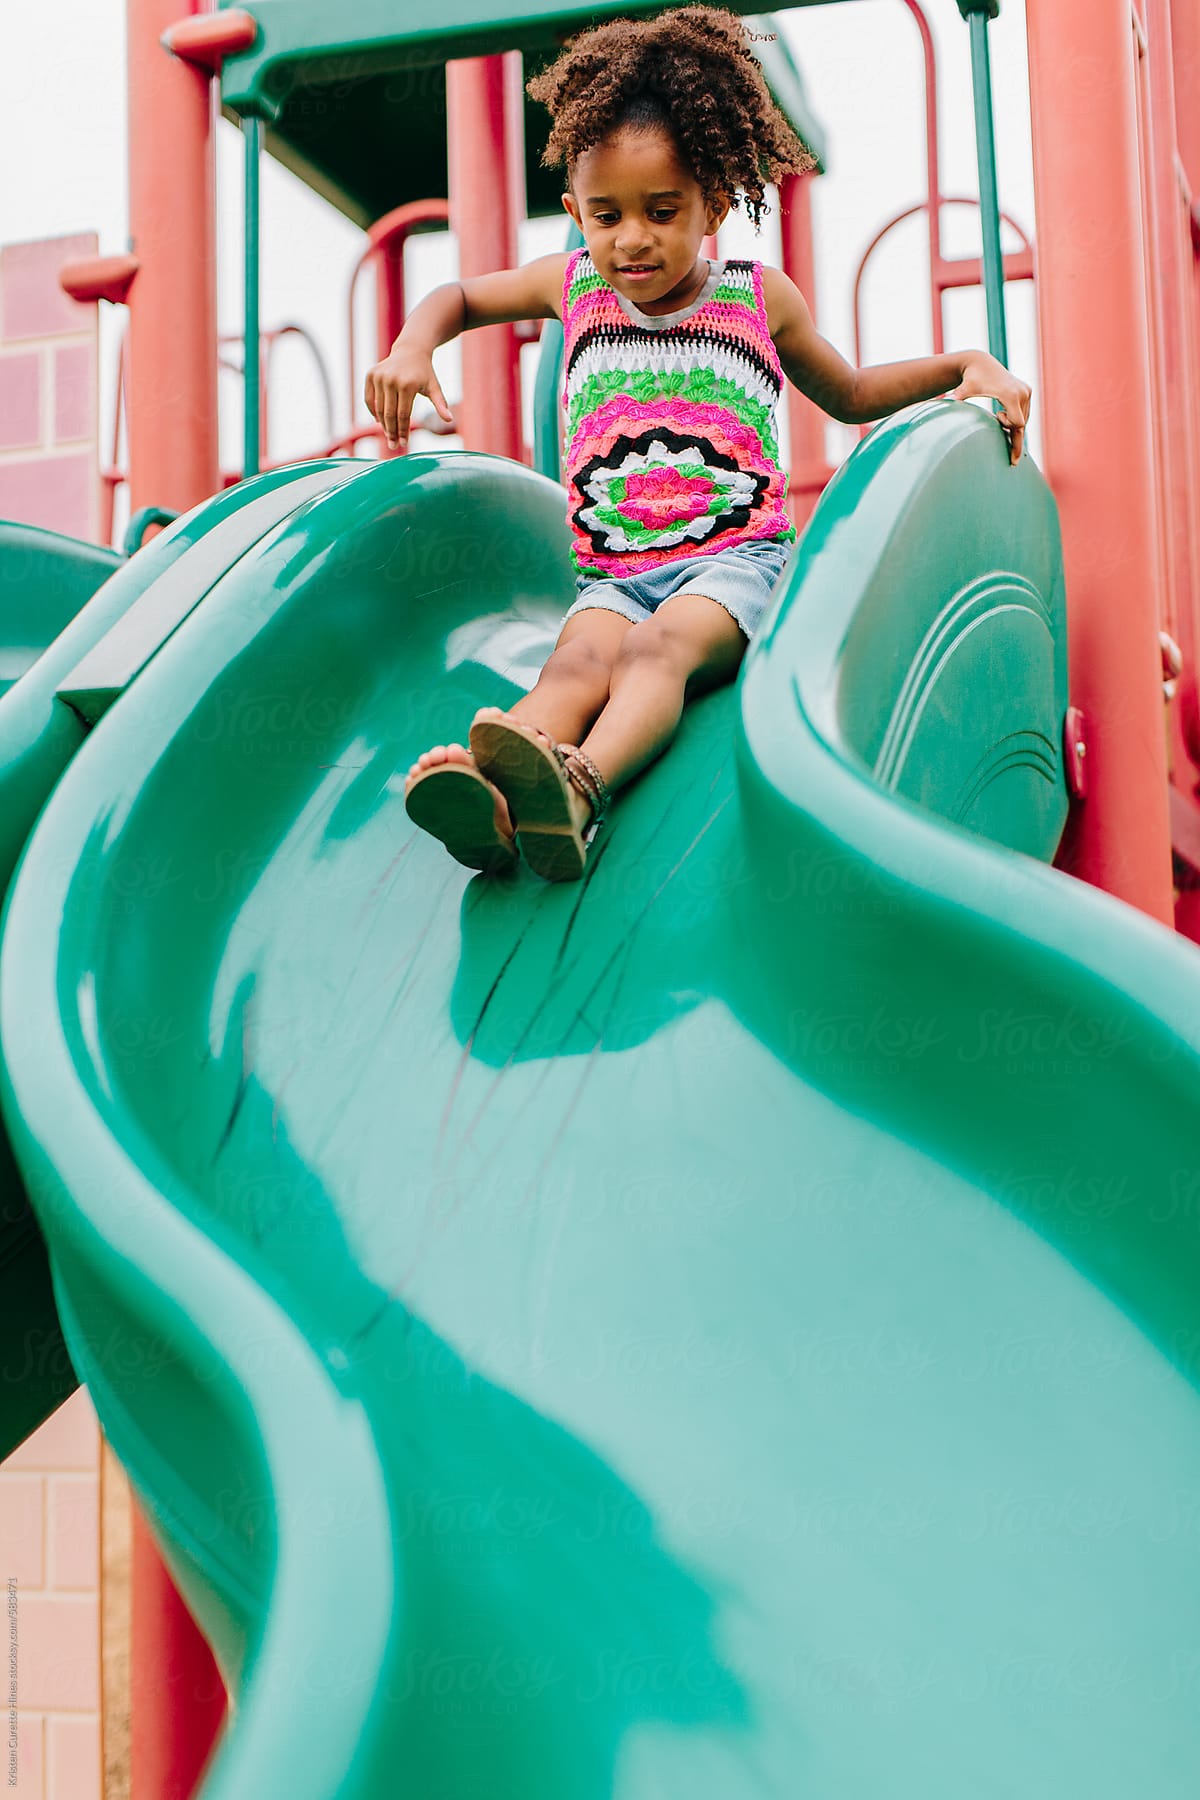 A Little Girl Sliding Down A Green Slide At The Playground. by Stocksy  Contributor Kristen Curette & Daemaine Hines - Stocksy